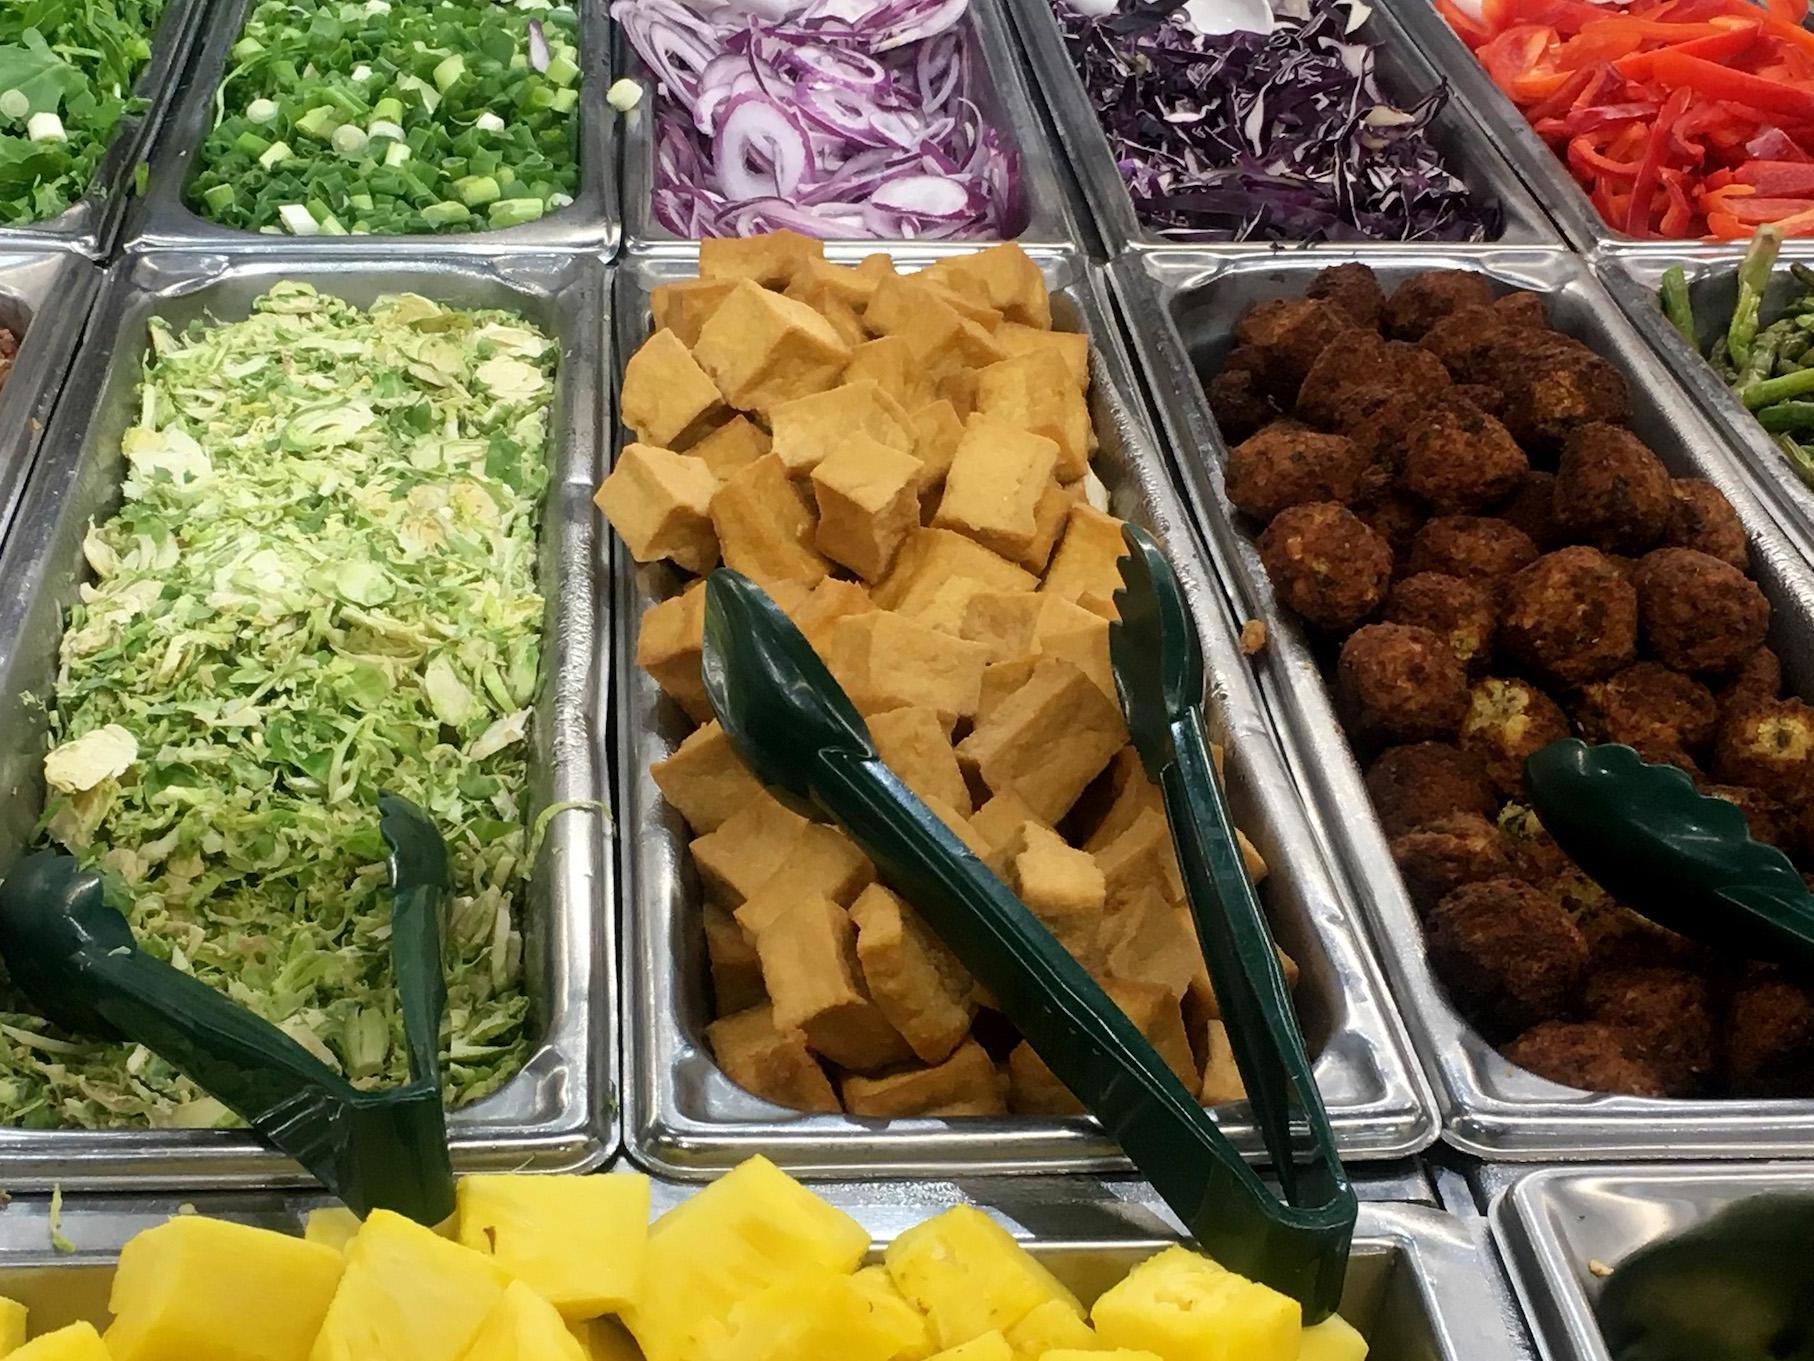 Tofu along with other vegetarian food is viewed at a store on November 25, 2019 in Washington,DC